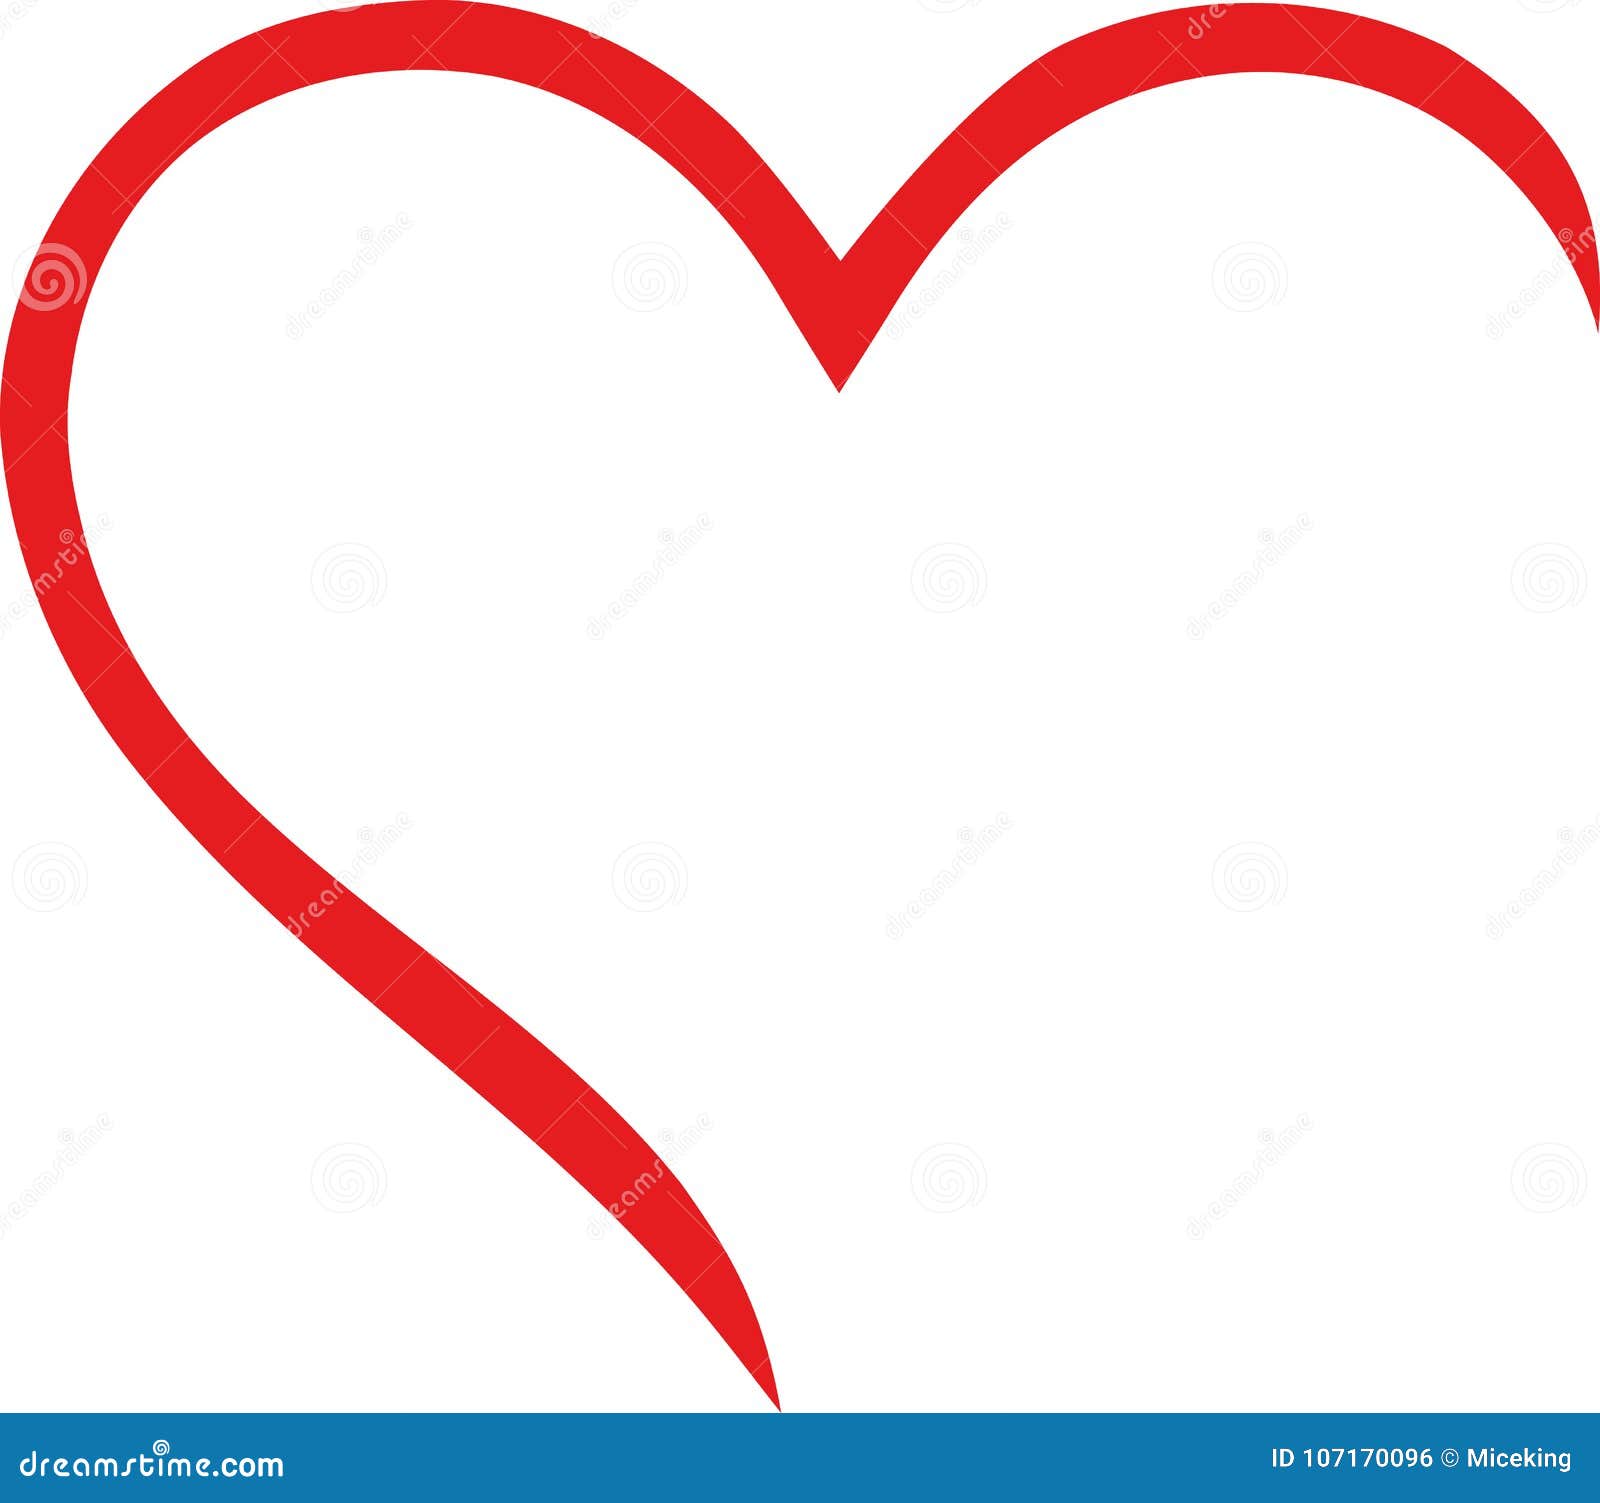 half heart outline stock vector illustration of amour 107170096